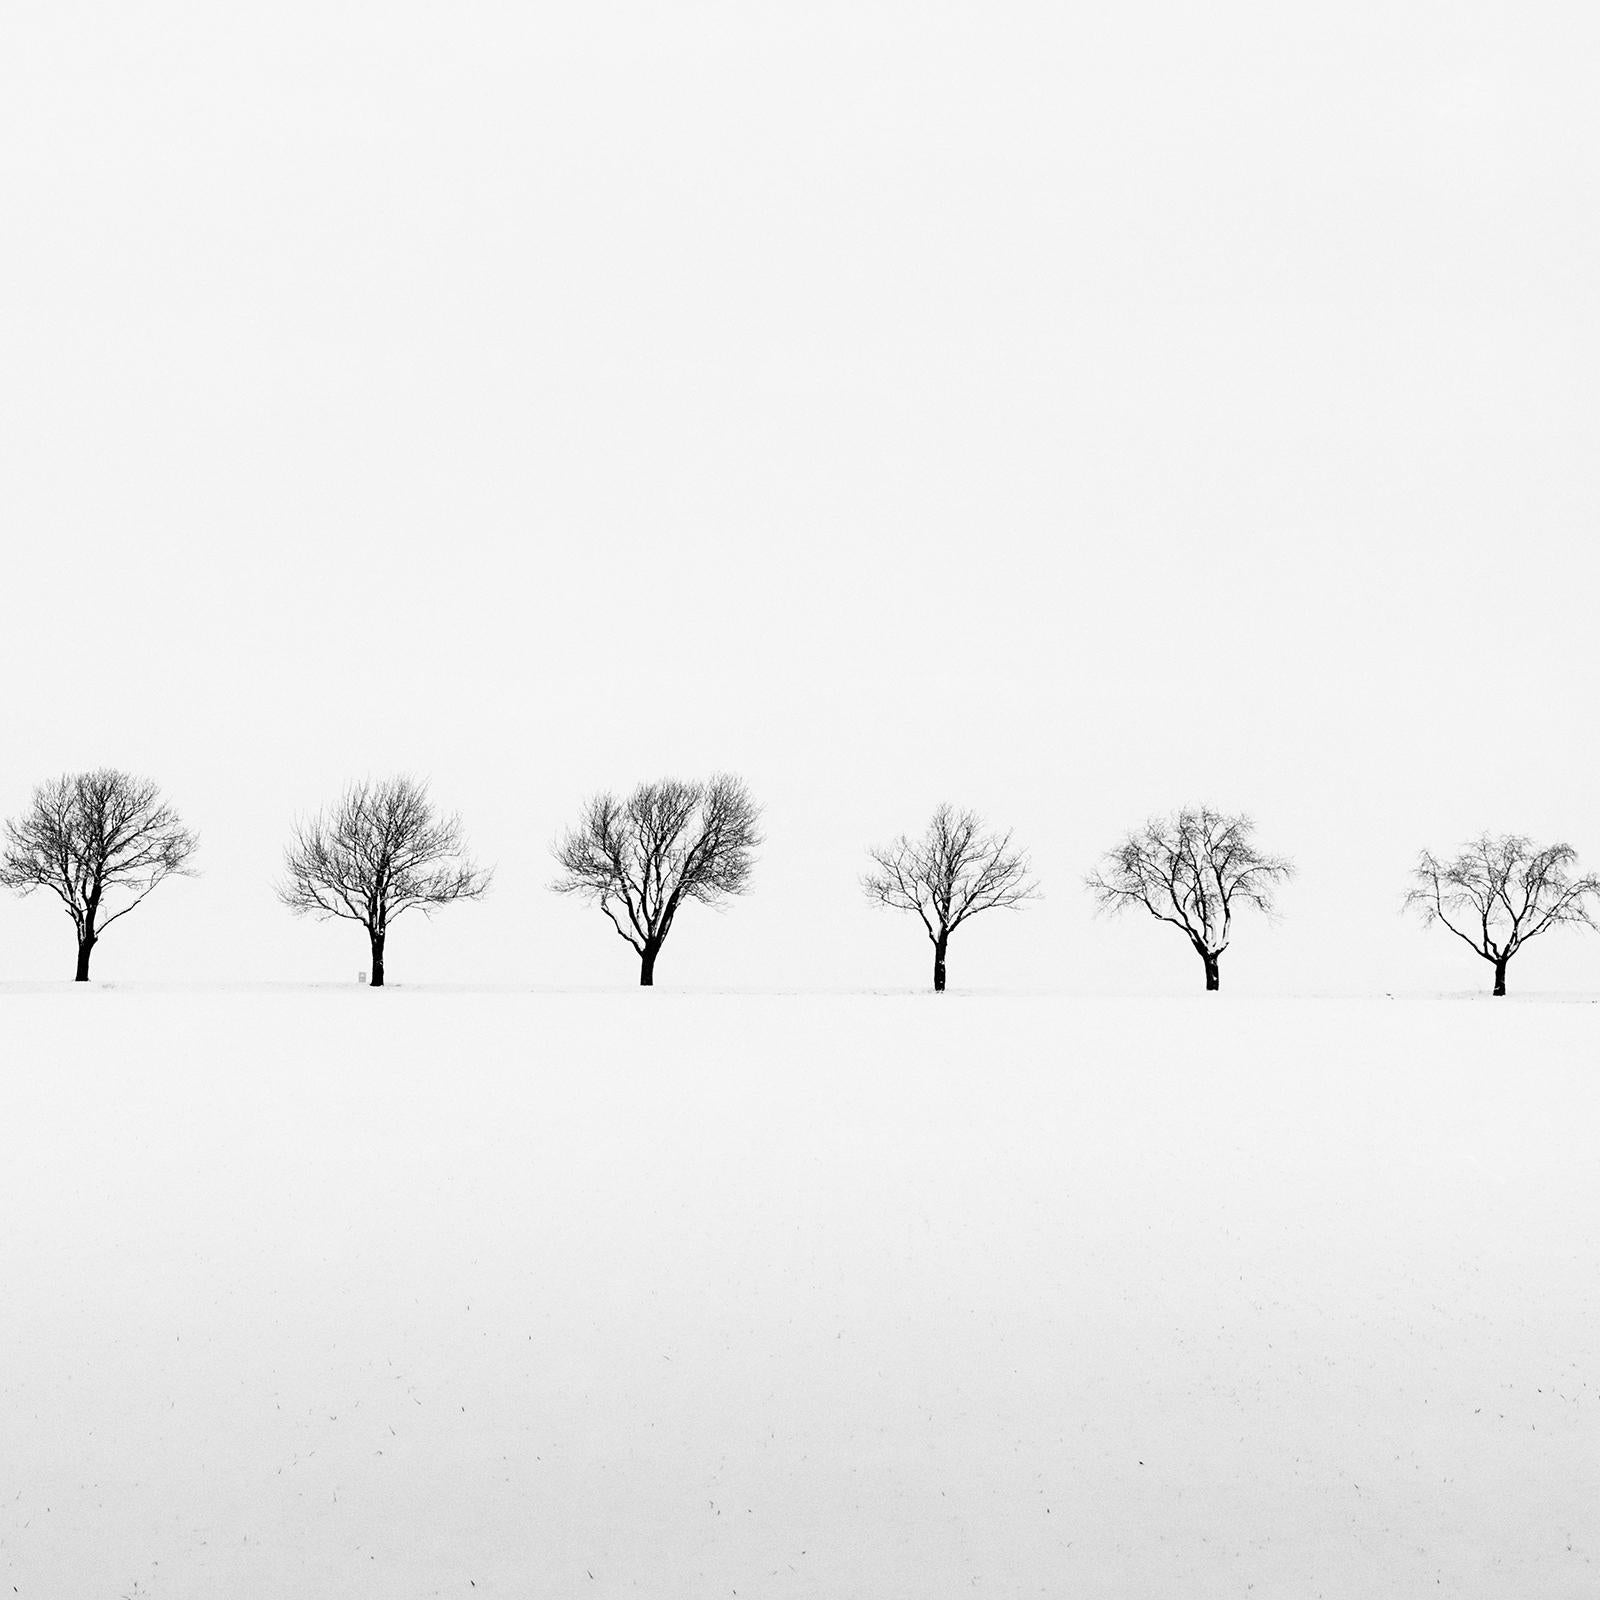 Cherry Trees in Snow Field, minimalist black and white photography, landscape For Sale 3